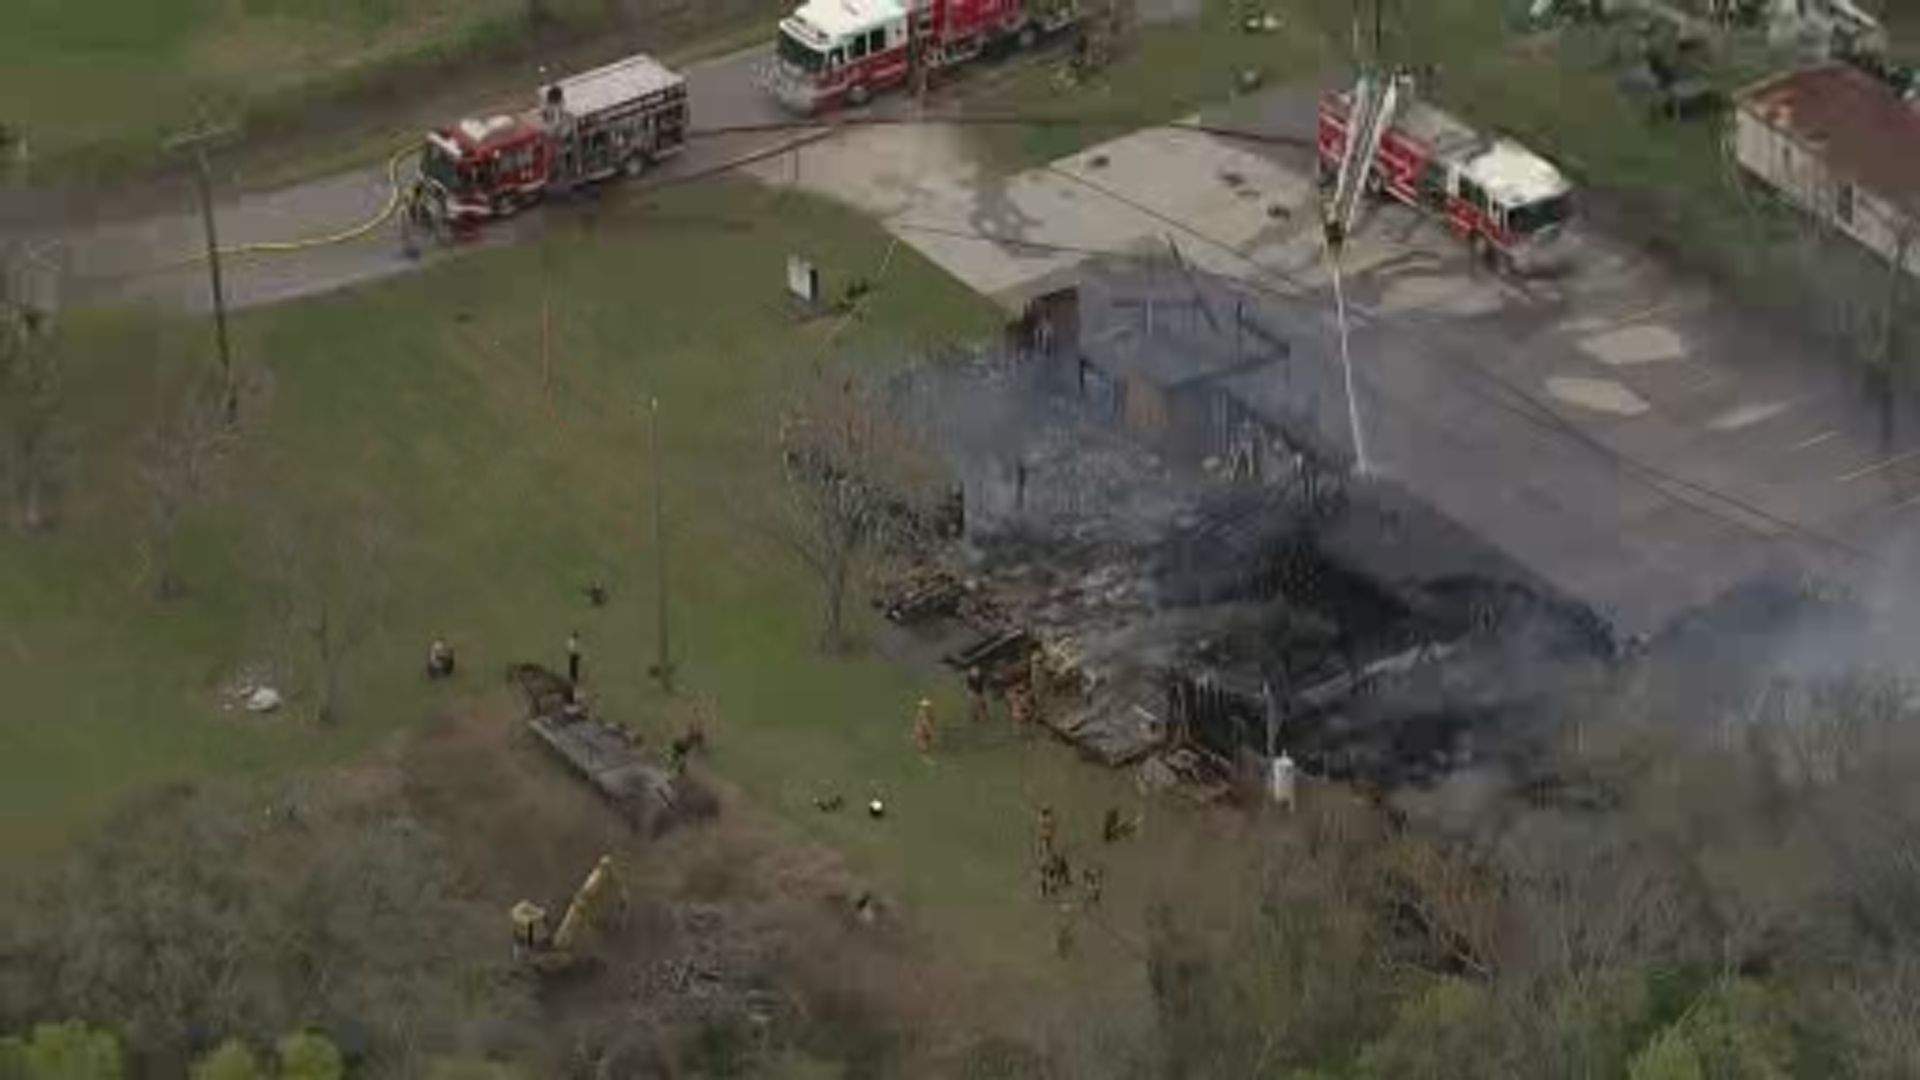 150-year-old Brazoria County church burns to the ground after plumbing work sparks fire